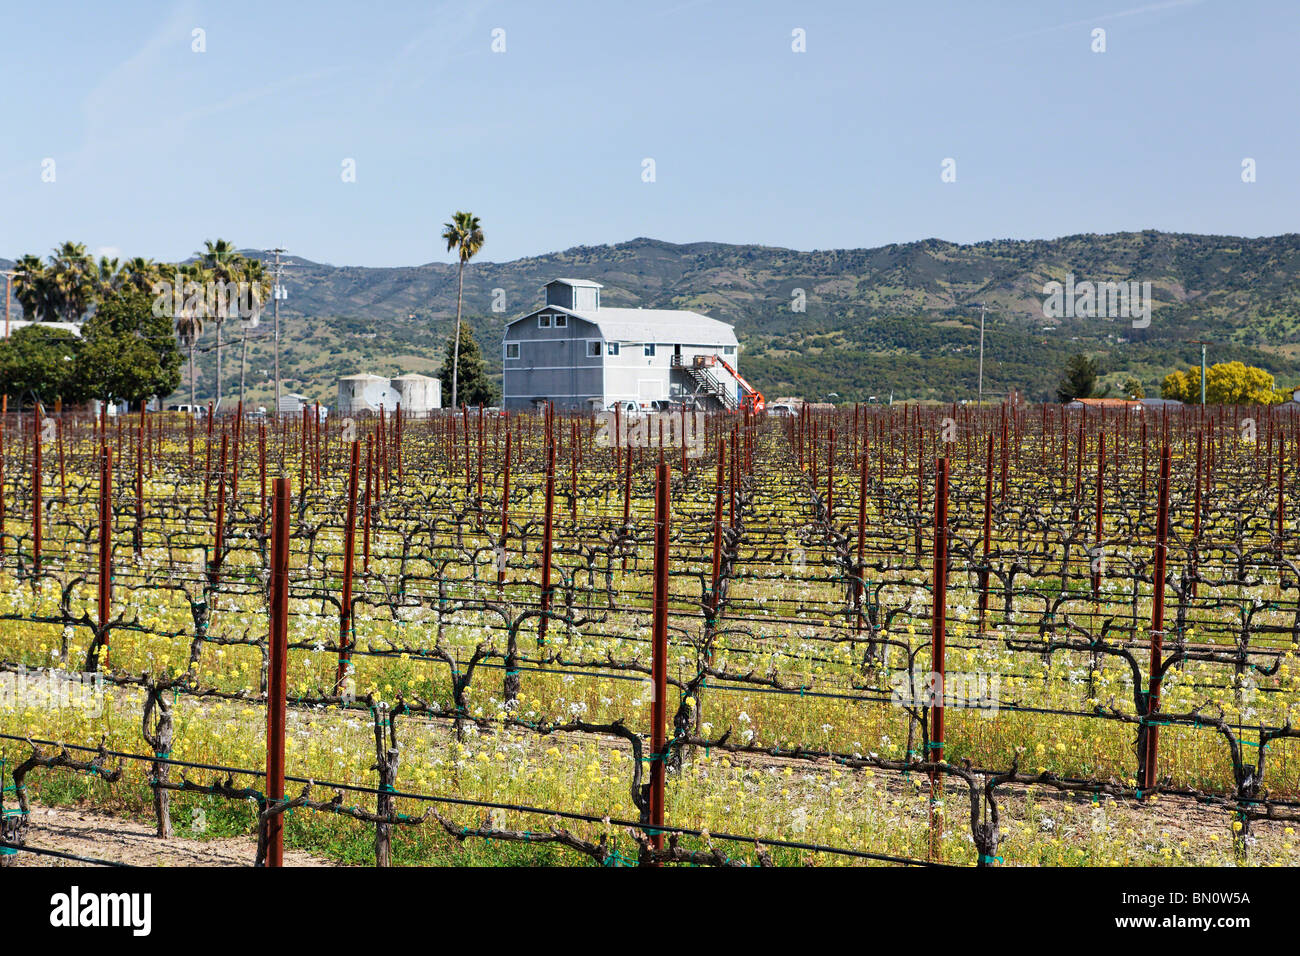 Monticelli Brothers Winery View, Napa, California Stock Photo